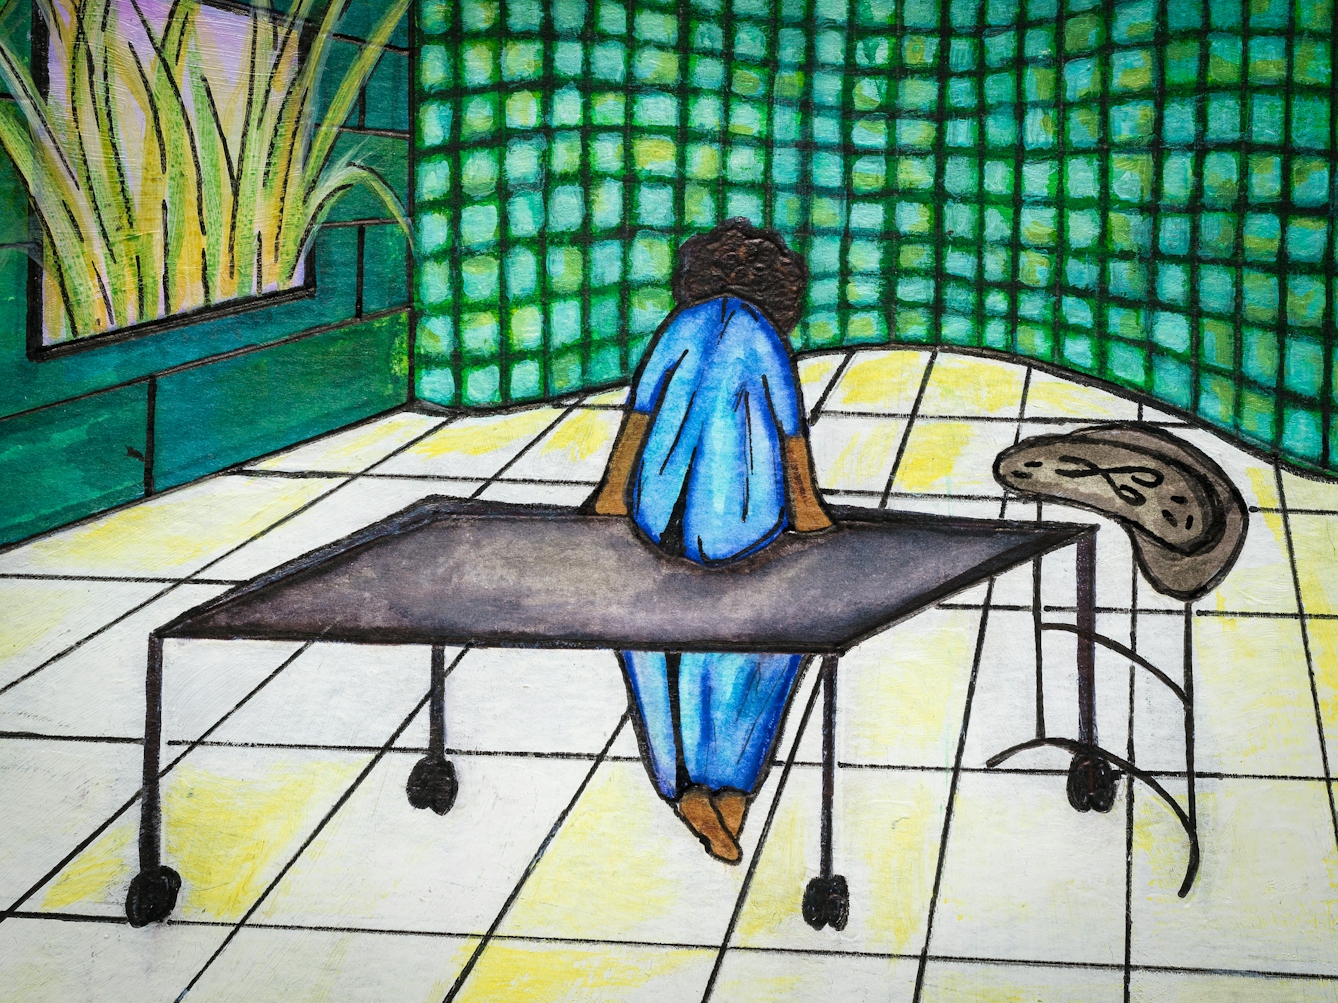 Detail from larger artwork made with paint and ink on textured watercolour paper. The artwork shows a Black woman in a blue hospital gown sat on a table in a hospital examination room, facing away from us. She is hunched forwards. Around her are is the decor of a hospital room, strip lighting, air conditioning vents and a small table with medical equipment laid out.